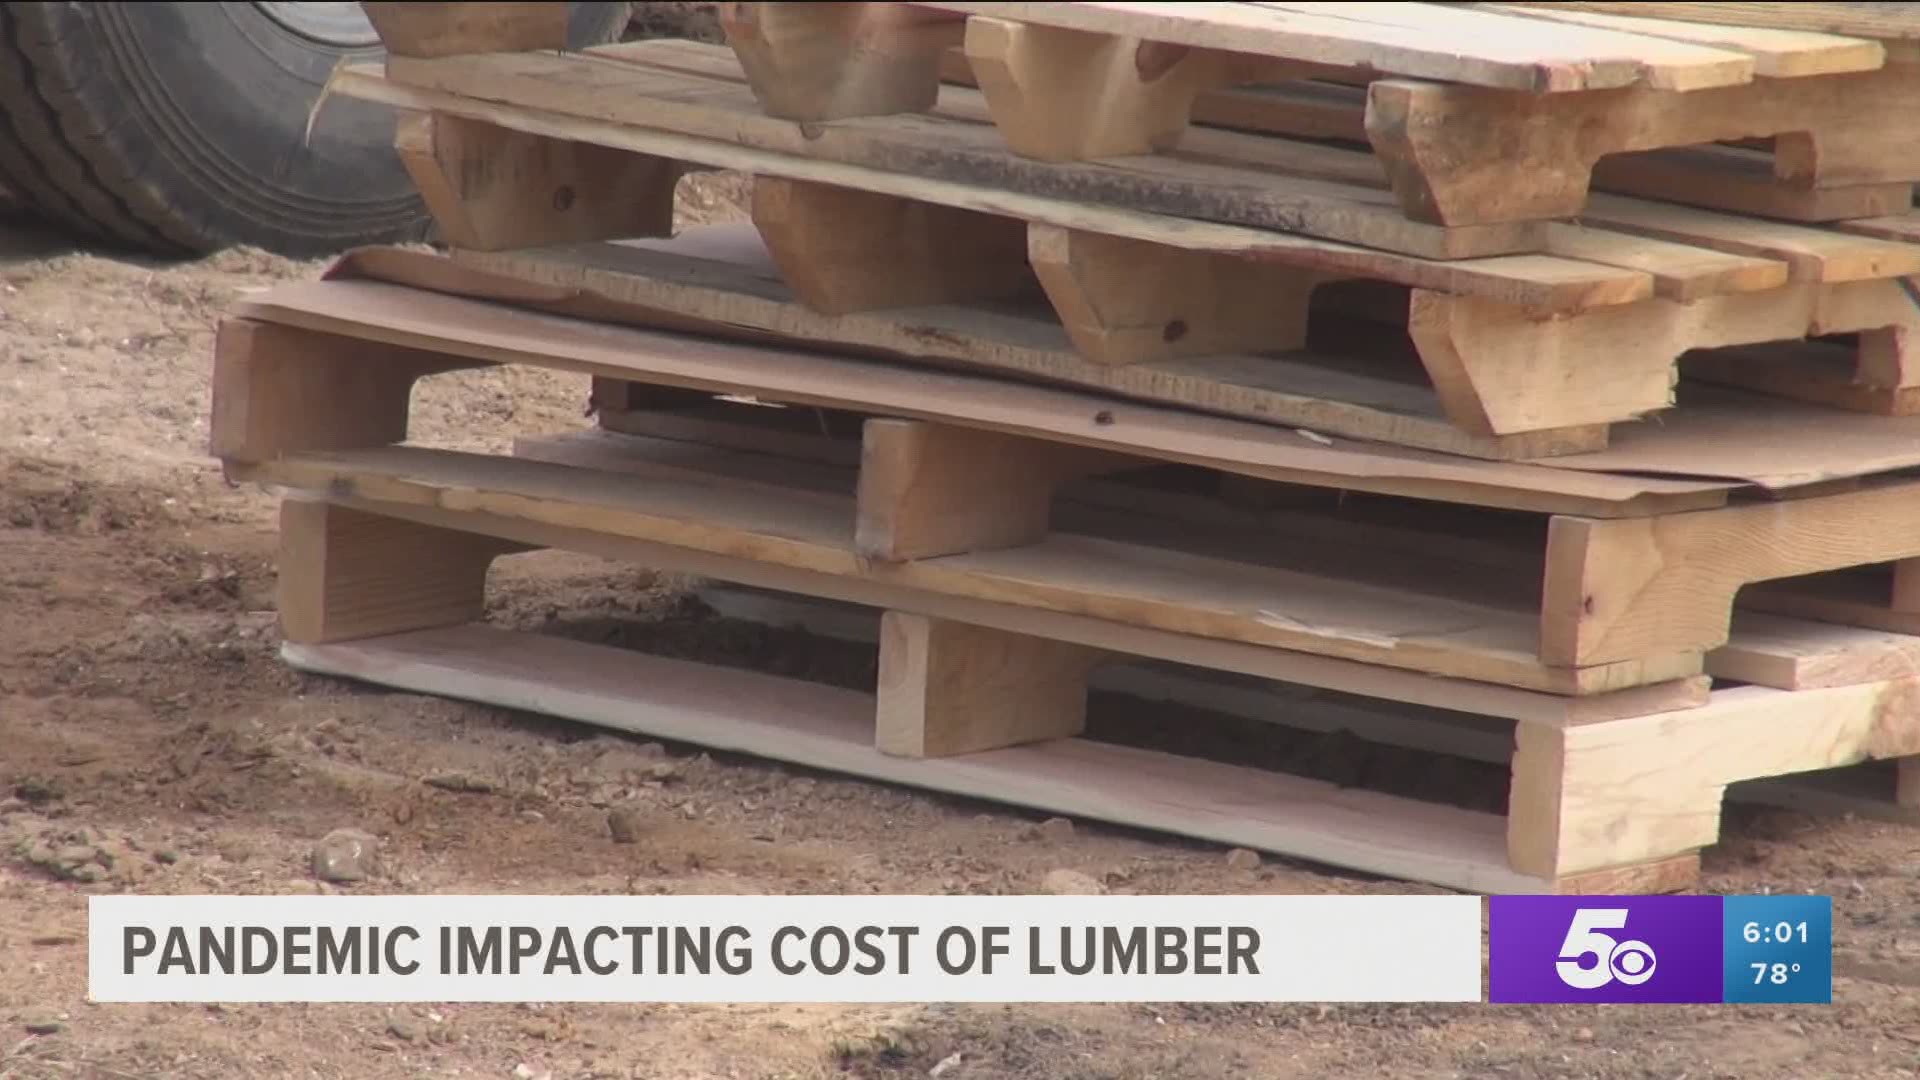 The coronavirus pandemic has been impacting the cost of lumber for builders in our area.